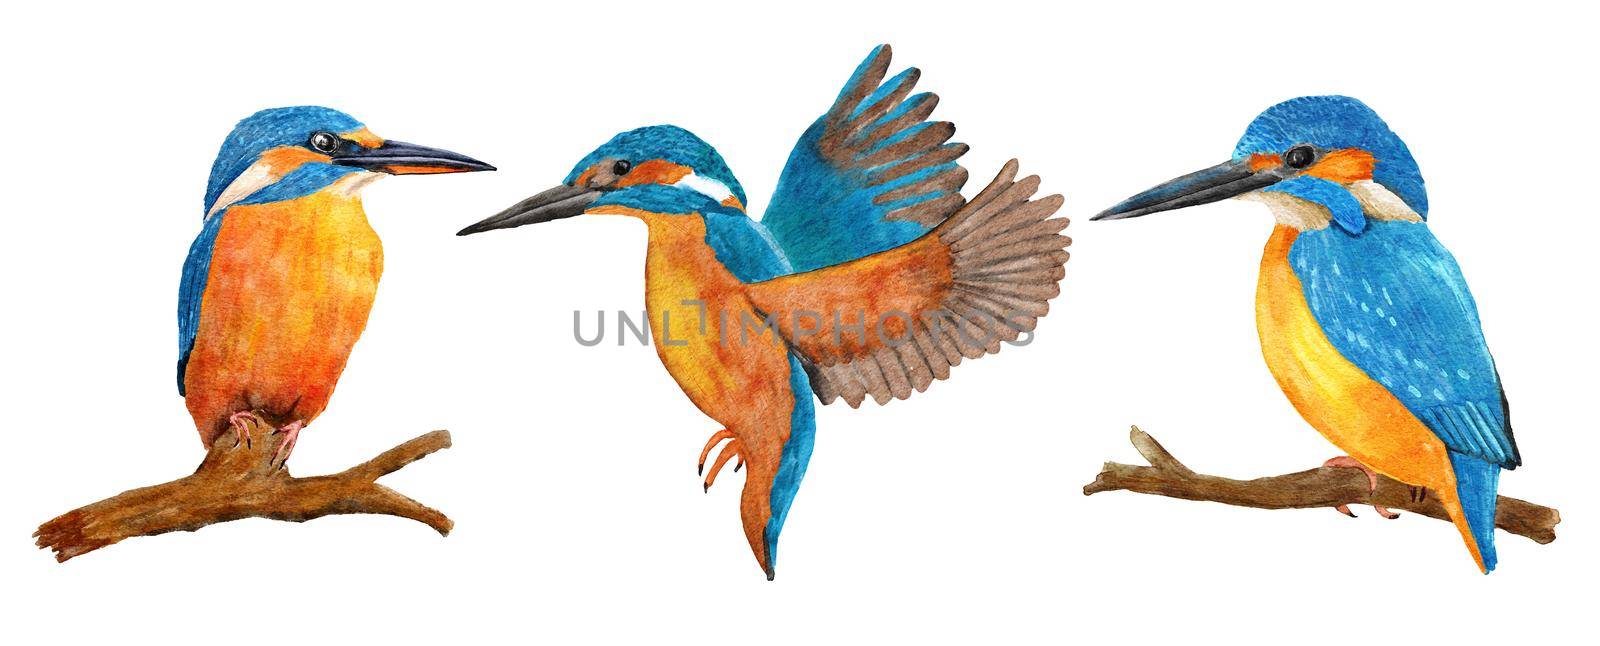 Hand drawn watercolor illustration of wild kingfisher birds, blue azure orange feathers, on the branch and flying. Nature natural wildlife in river forest woodland, ecology concept